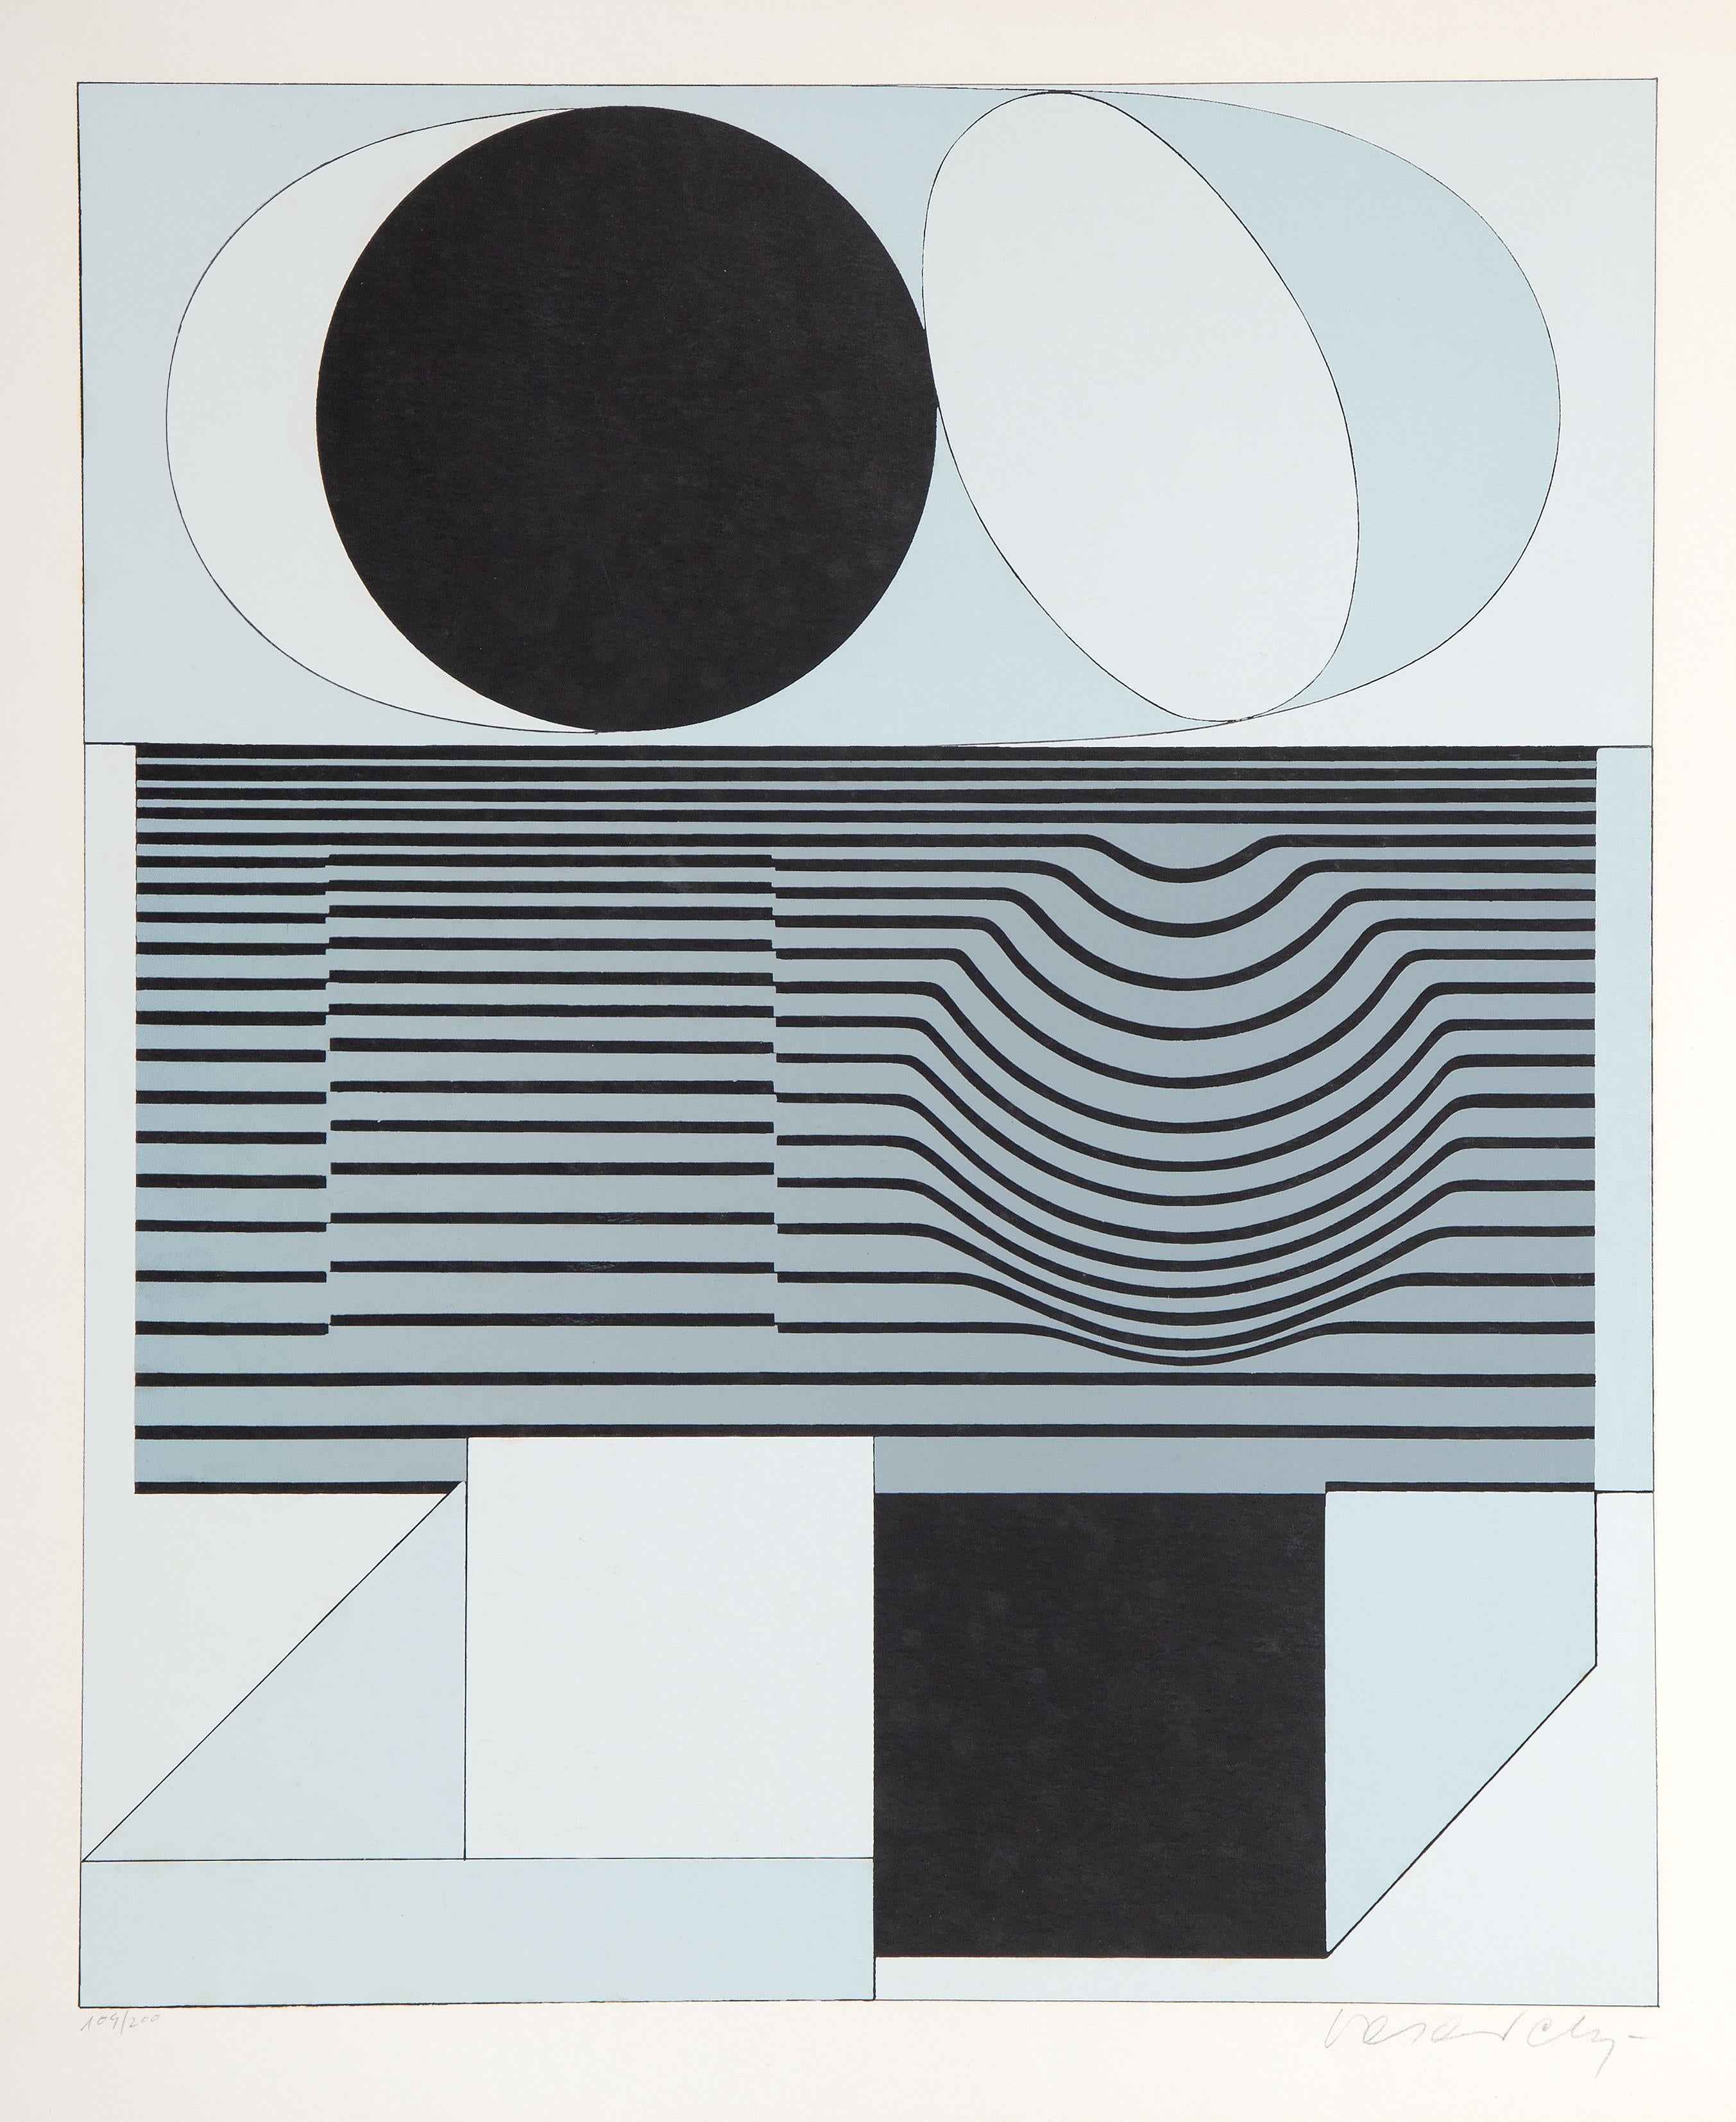 How many artworks did Victor Vasarely make?